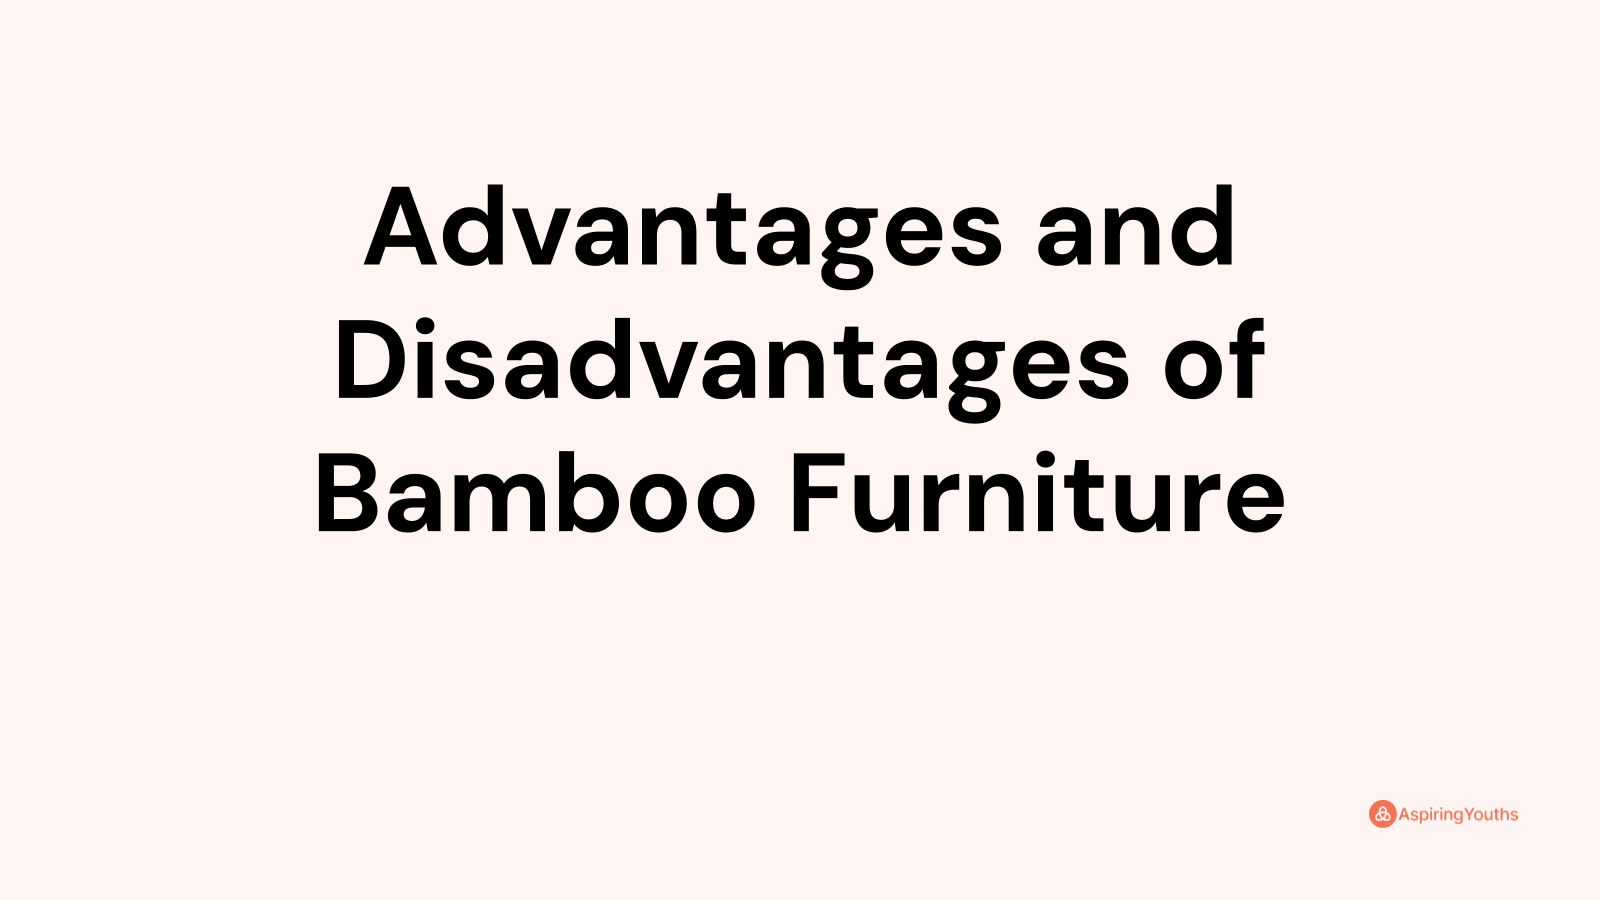 Advantages and disadvantages of Bamboo Furniture